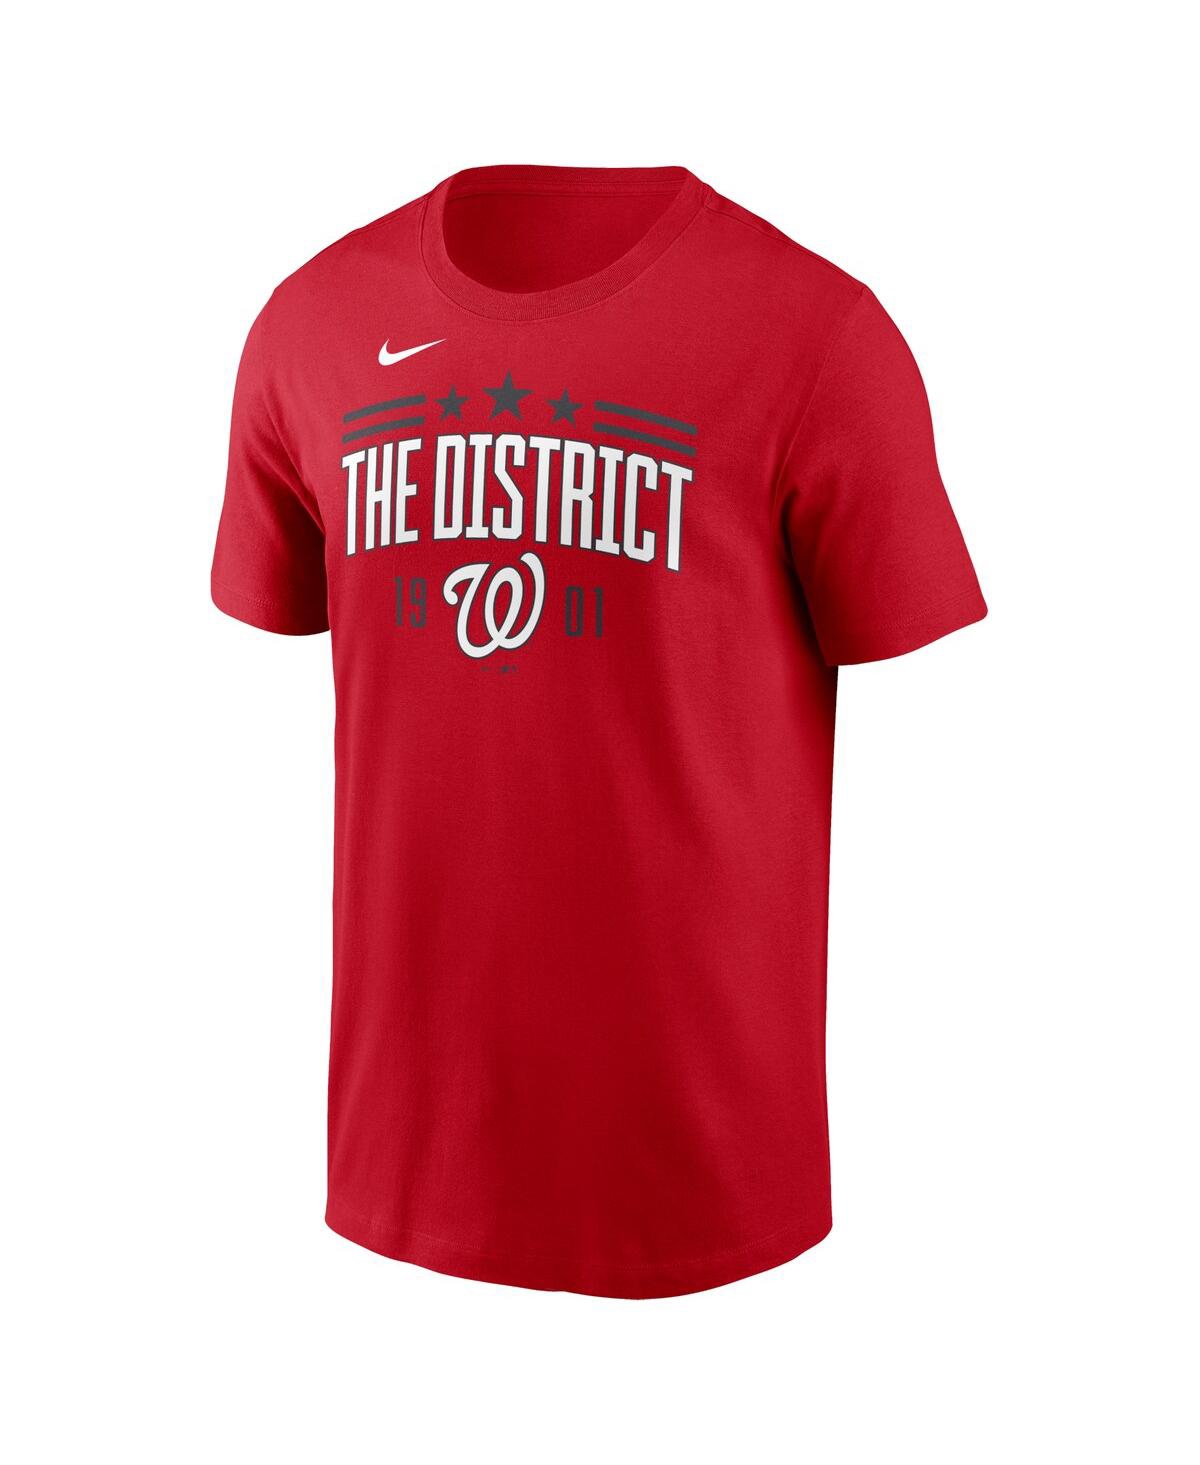 Shop Nike Men's  Red Washington Nationals The District 1901 Local Team T-shirt